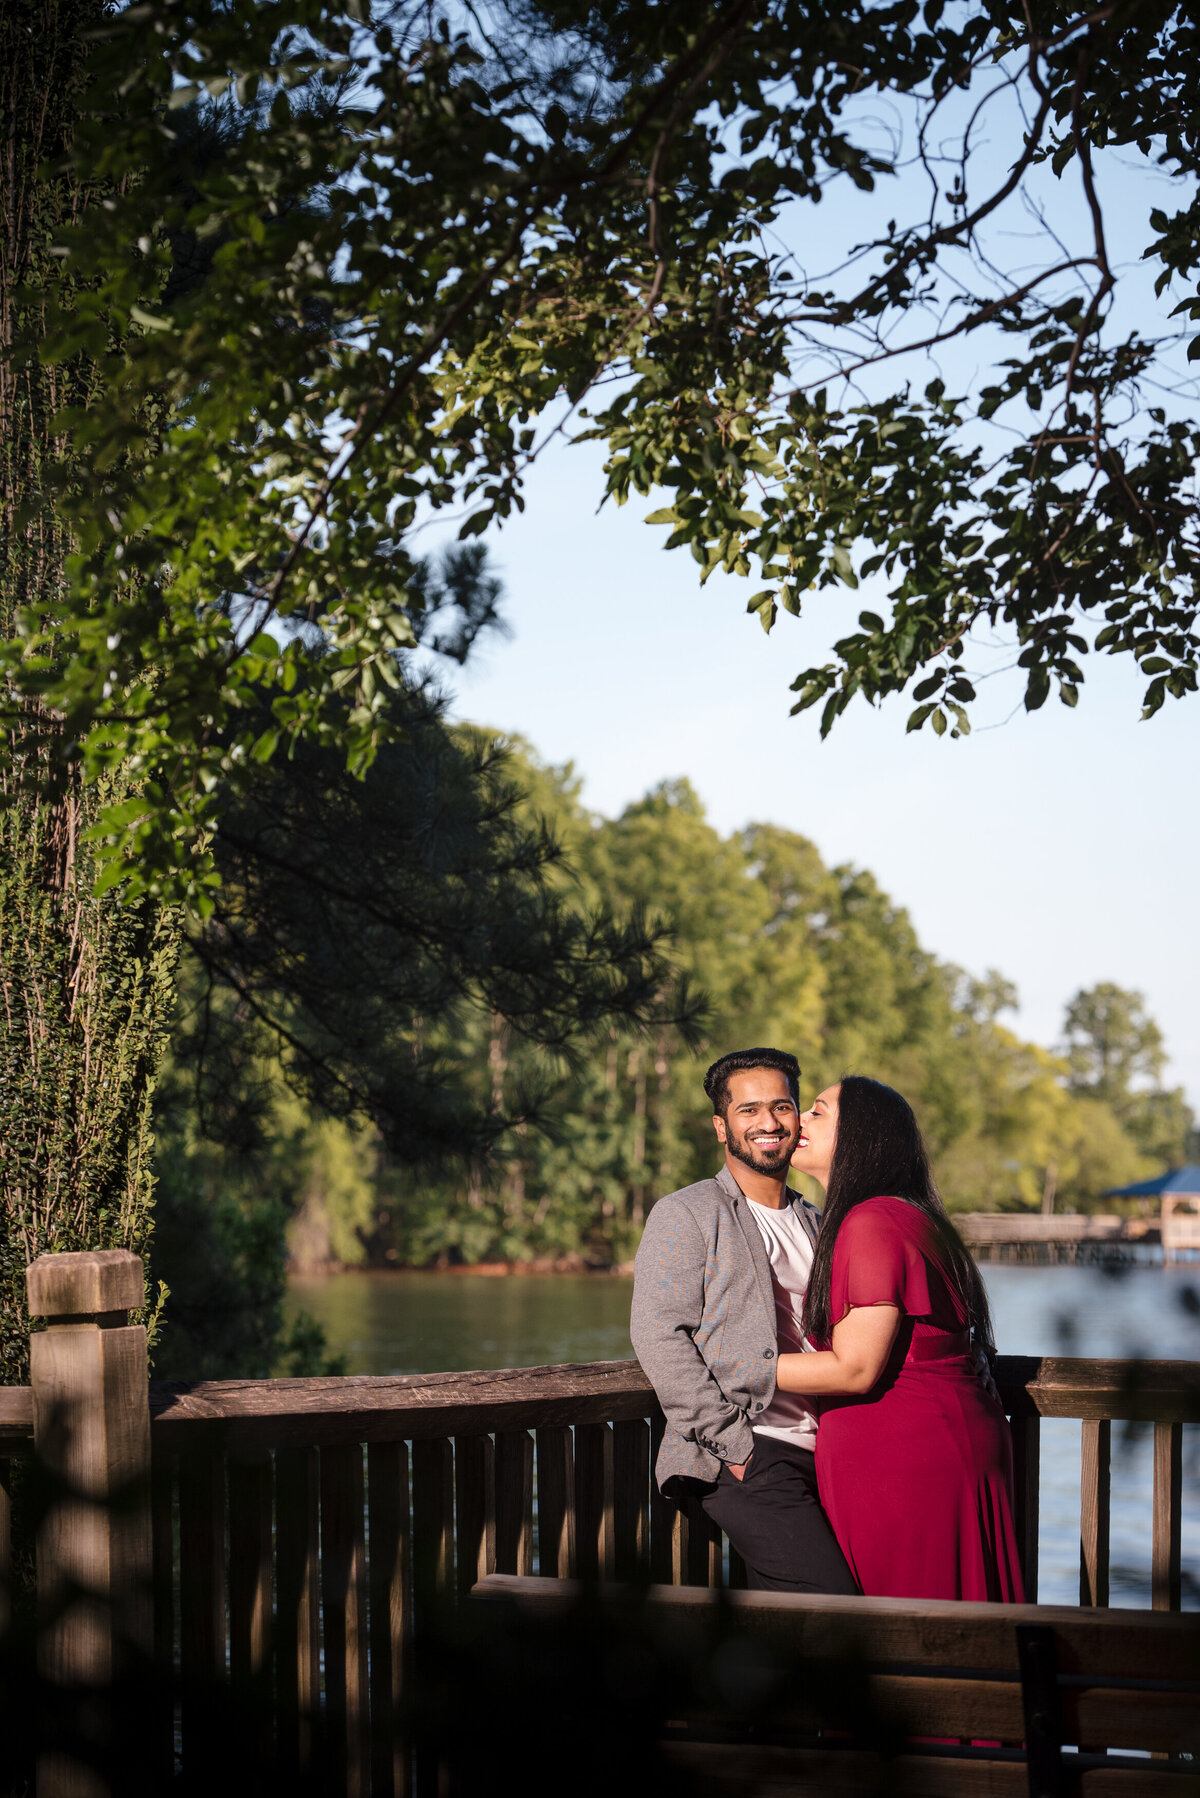 Indian-woman-kissing-Indian-man-on-his-cheek-with-greenery-and-a-lake-in-the-background-at-Jetton-Park